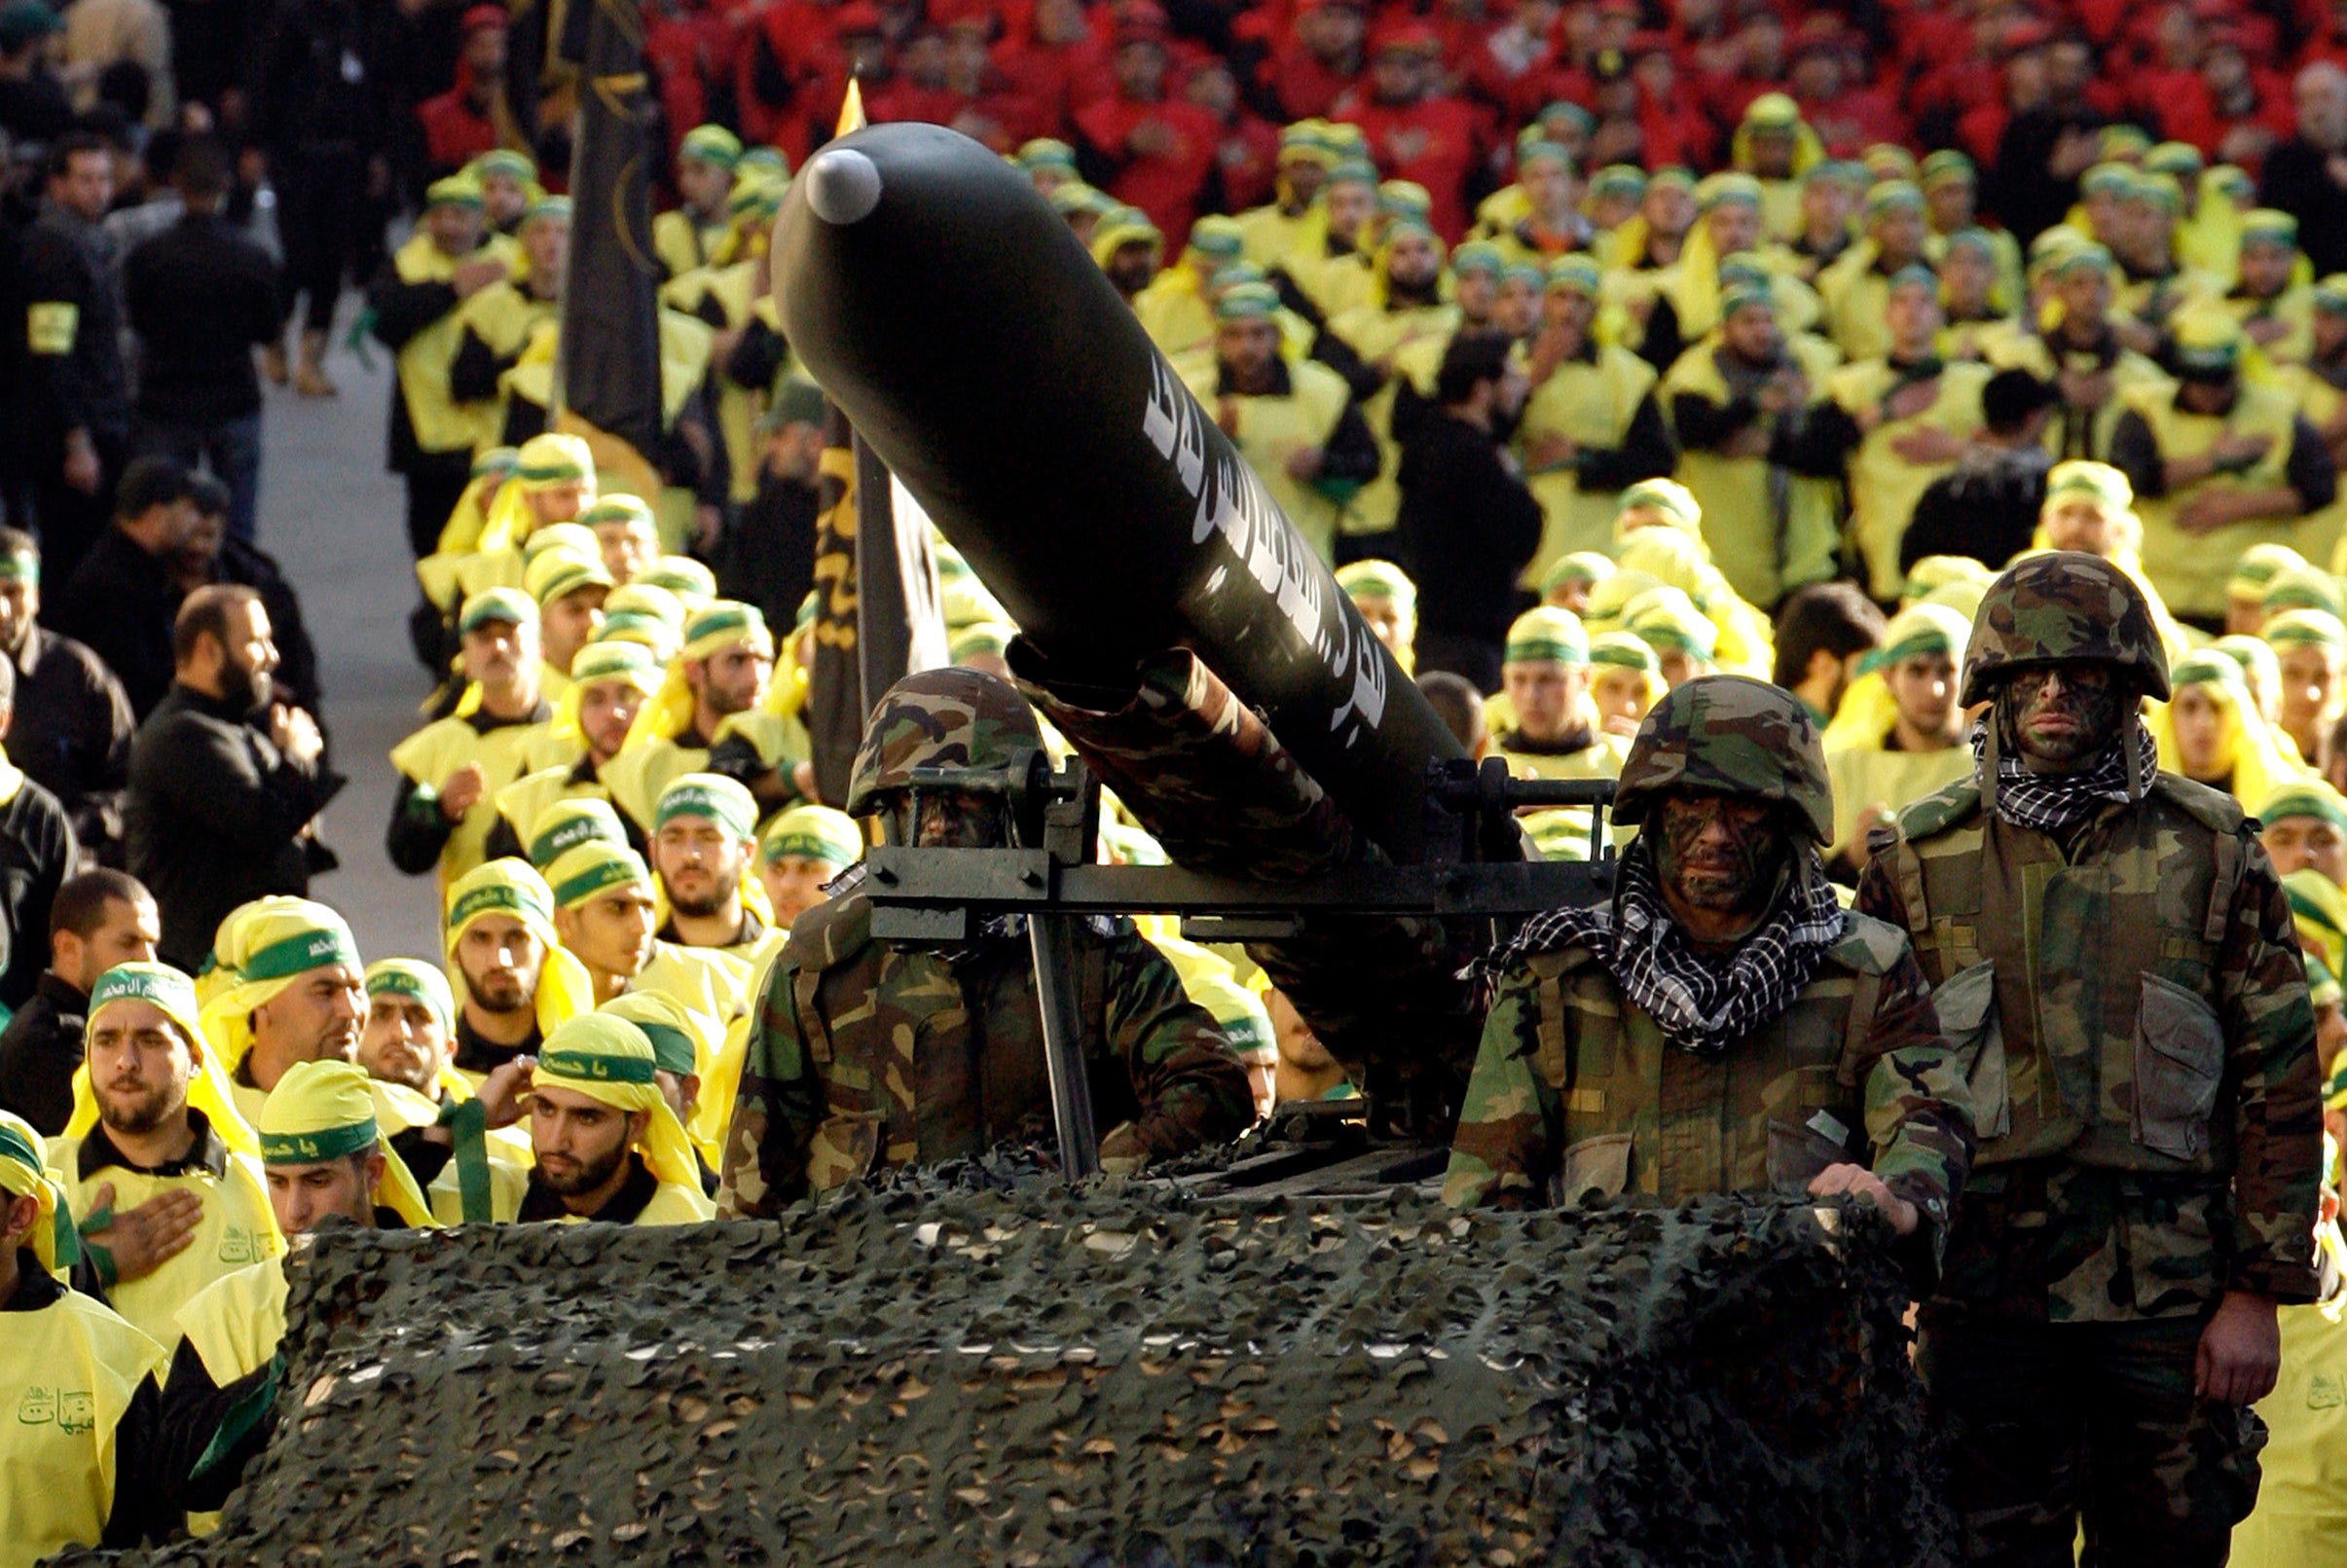 Lebanese Shiite Muslim Hezbollah militants ride on a vehicle carrying a Fajr 5 missile during the annual parade in the southern town of Nabatiyeh on November 28, 2012, to mark the 13th day of Muharram on the Islamic calendar, commemorating and mourning the seventh-century martyrdom of Prophet Muhammad's grandson, Imam Hussein, in the battle of Karbala in Iraq. AFP PHOTO/MAHMOUD ZAYYAT        (Photo credit should read MAHMOUD ZAYYAT/AFP via Getty Images)